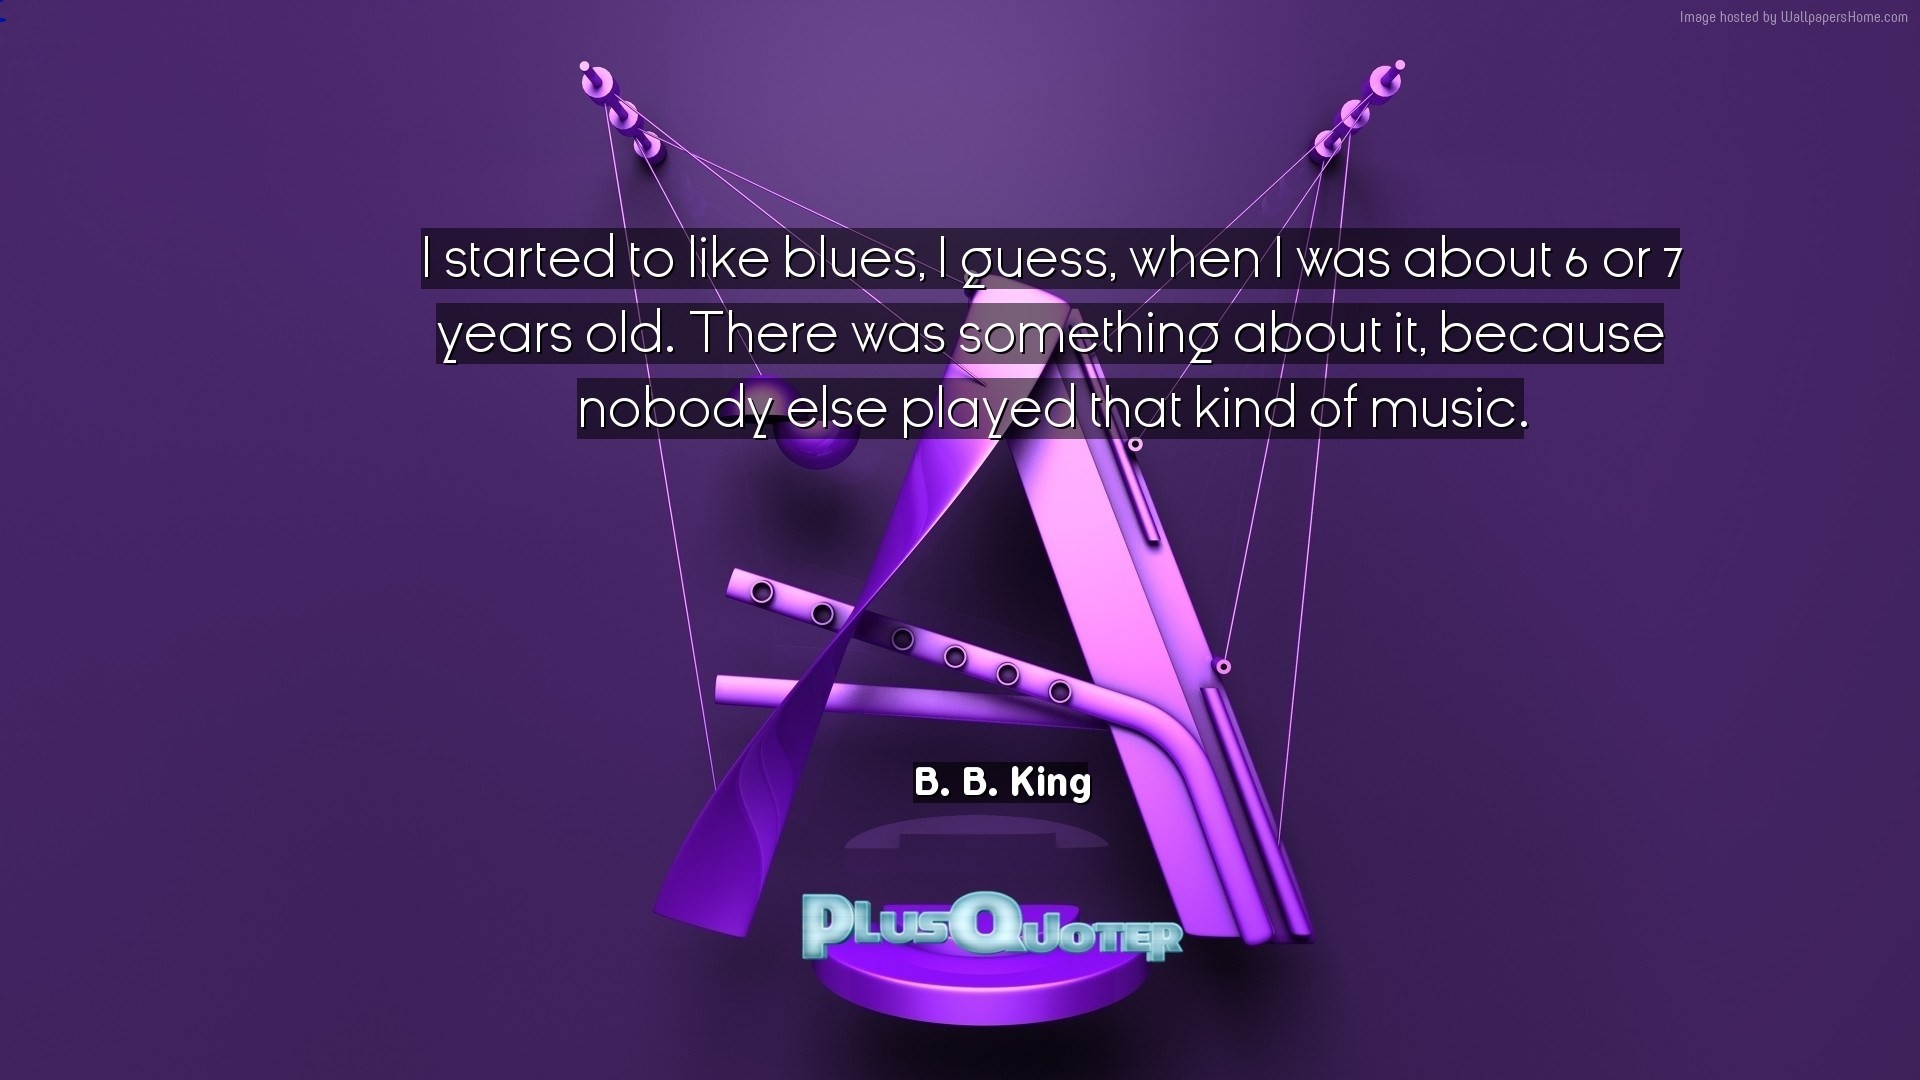 1920x1080 Download Wallpaper with inspirational Quotes- "I started to like blues, I  guess,